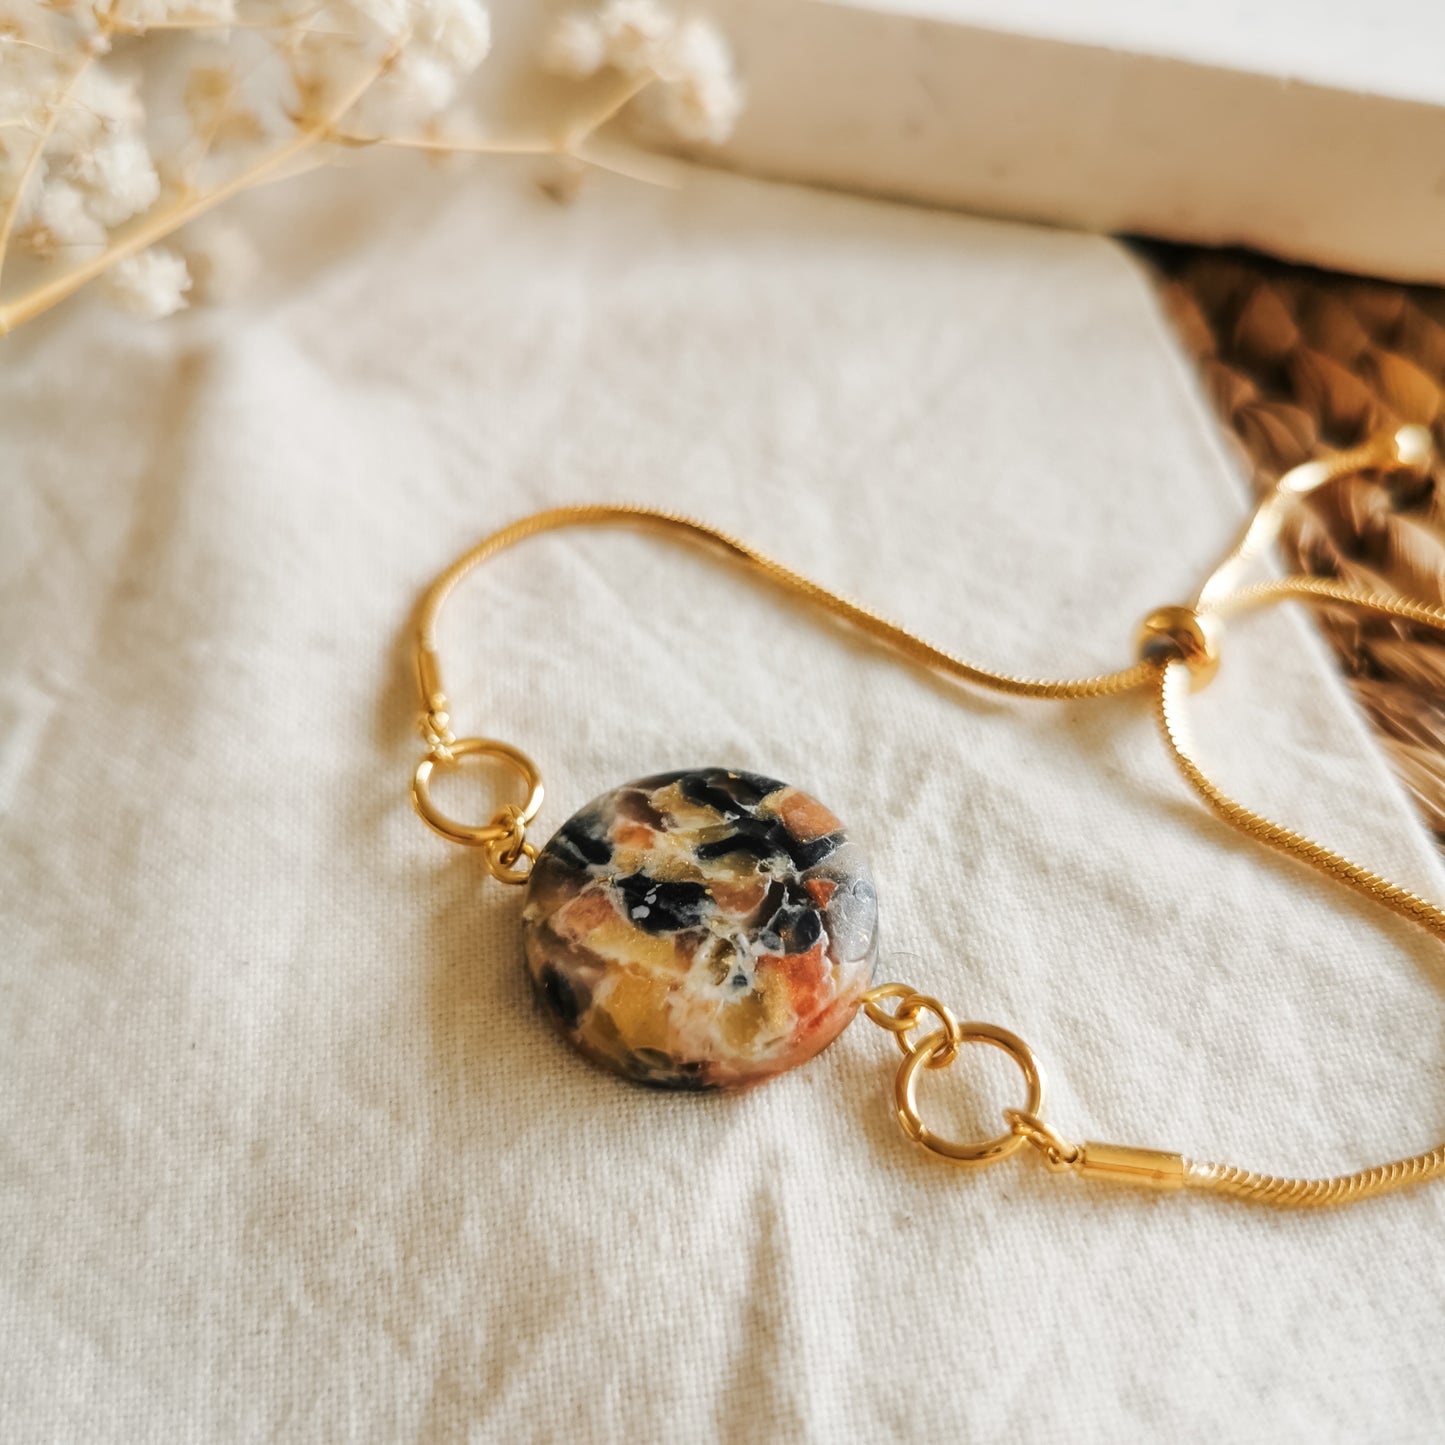 ROUND | Bracelet with sliding clasp and round charm in tortoiseshell